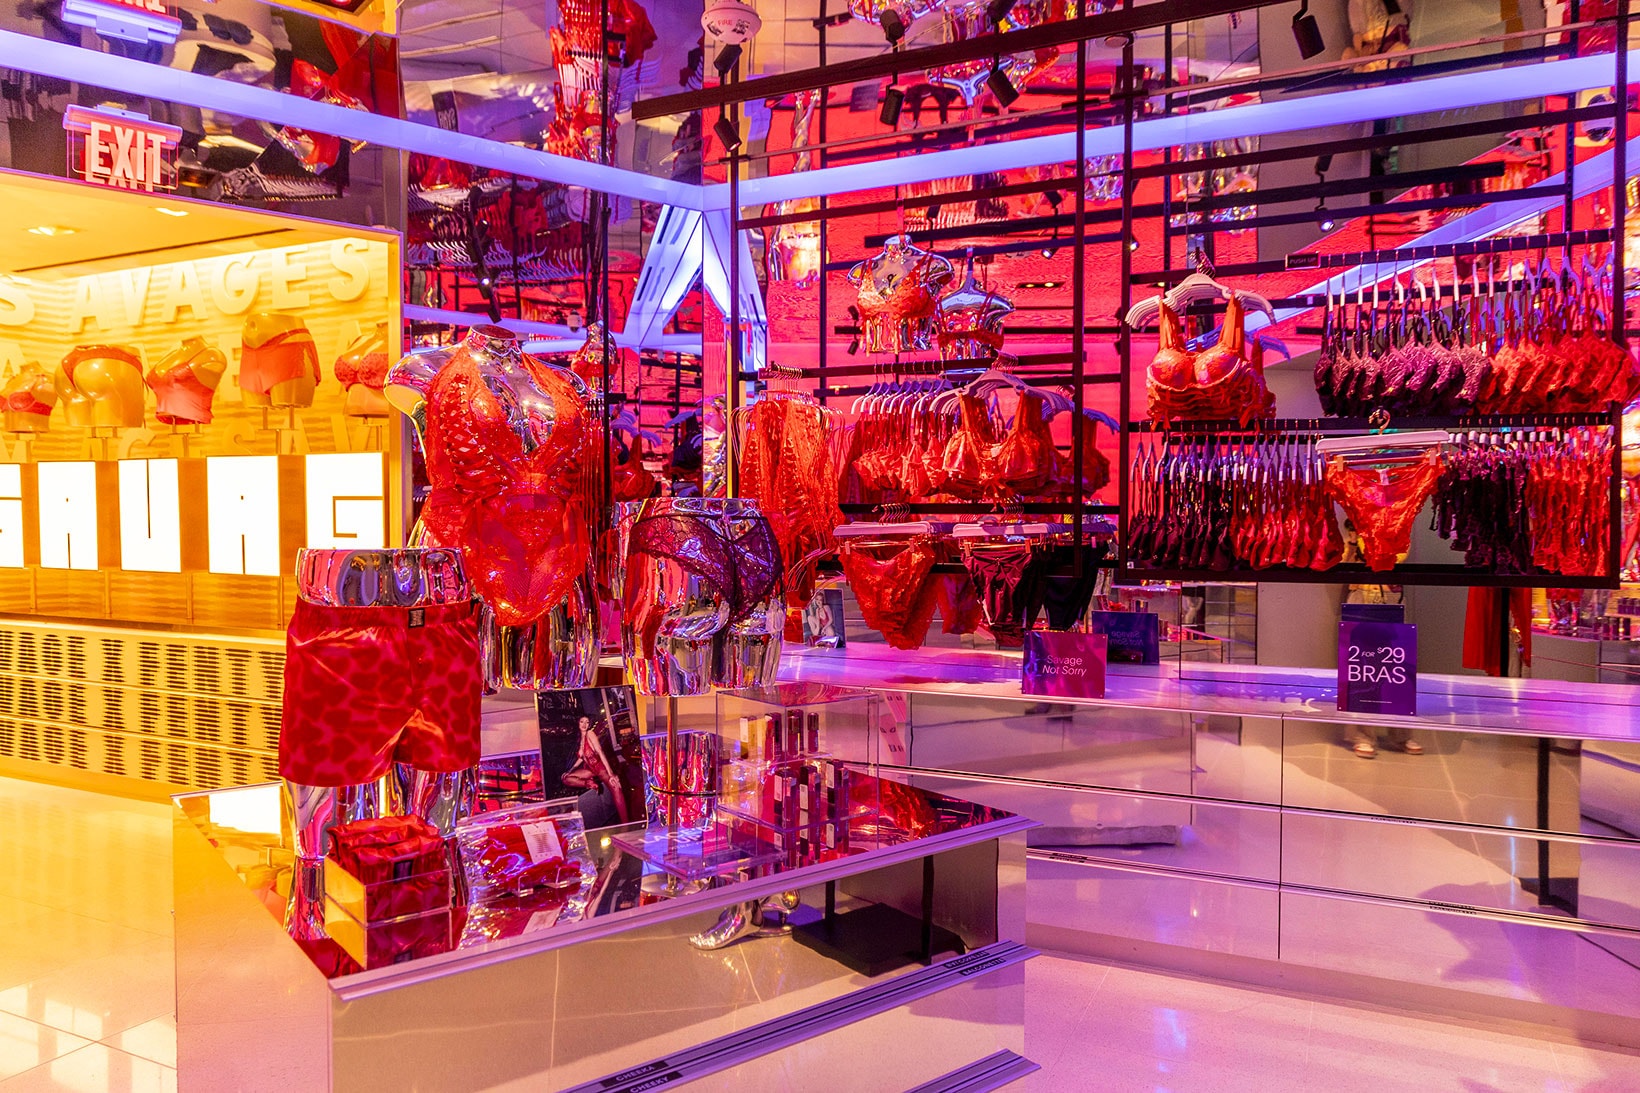 Rihanna's Savage X Fenty Opening Stores 2022, Takes on Victoria's